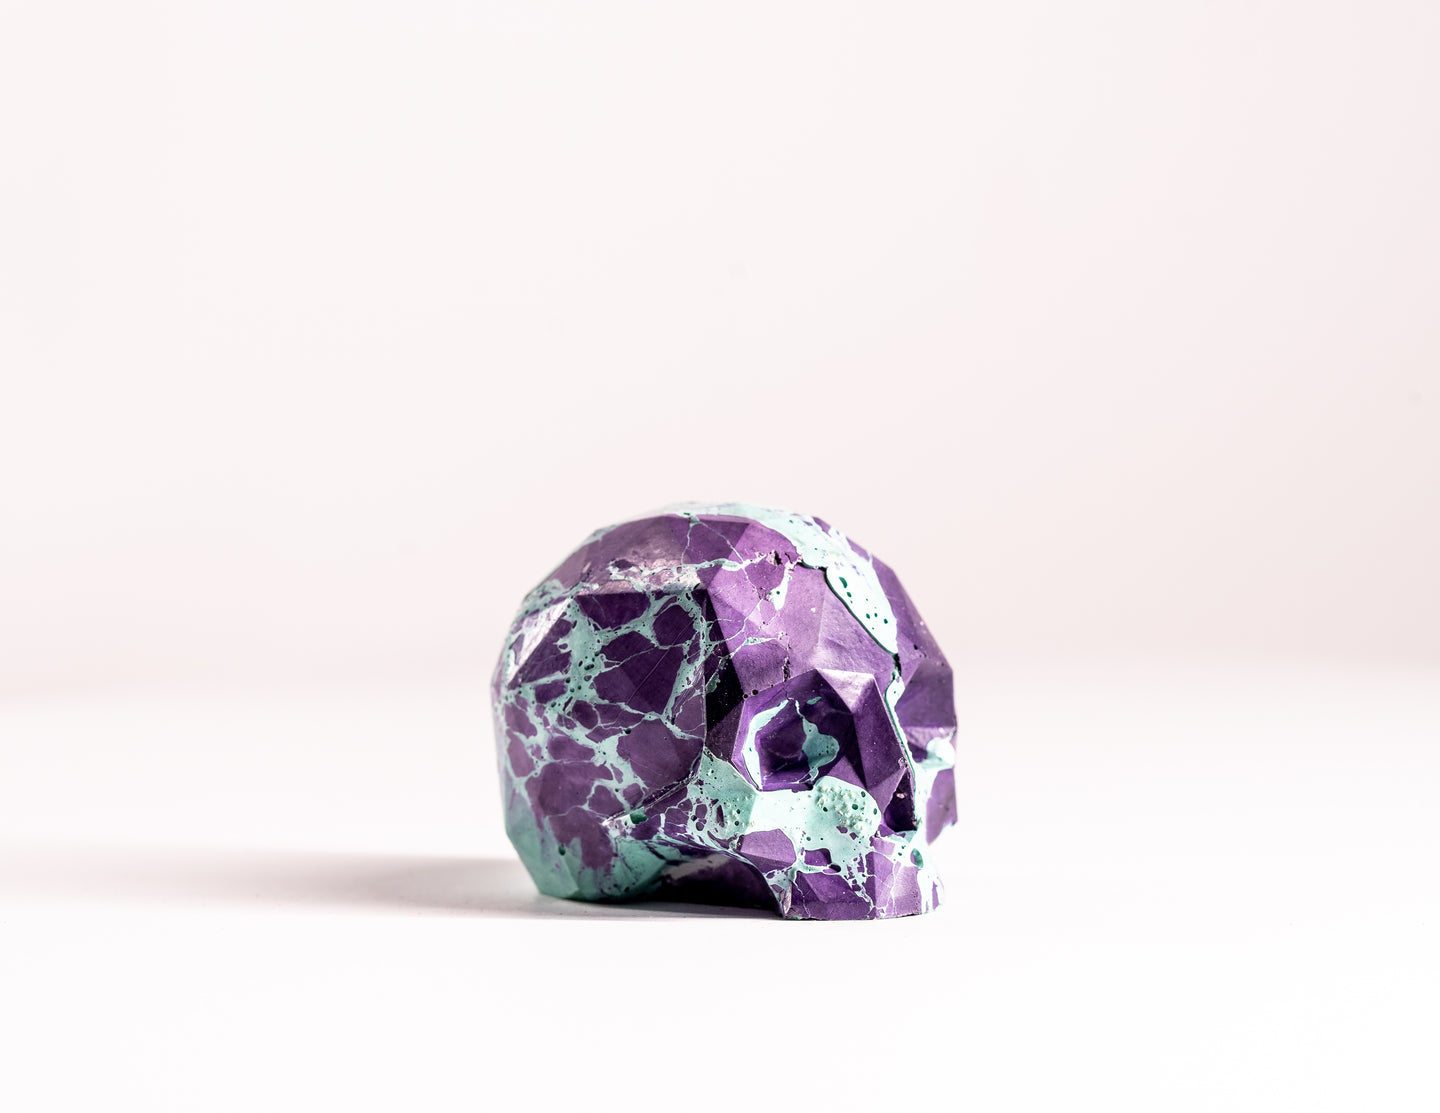 Mini Collectible Skull - Marbled - 84